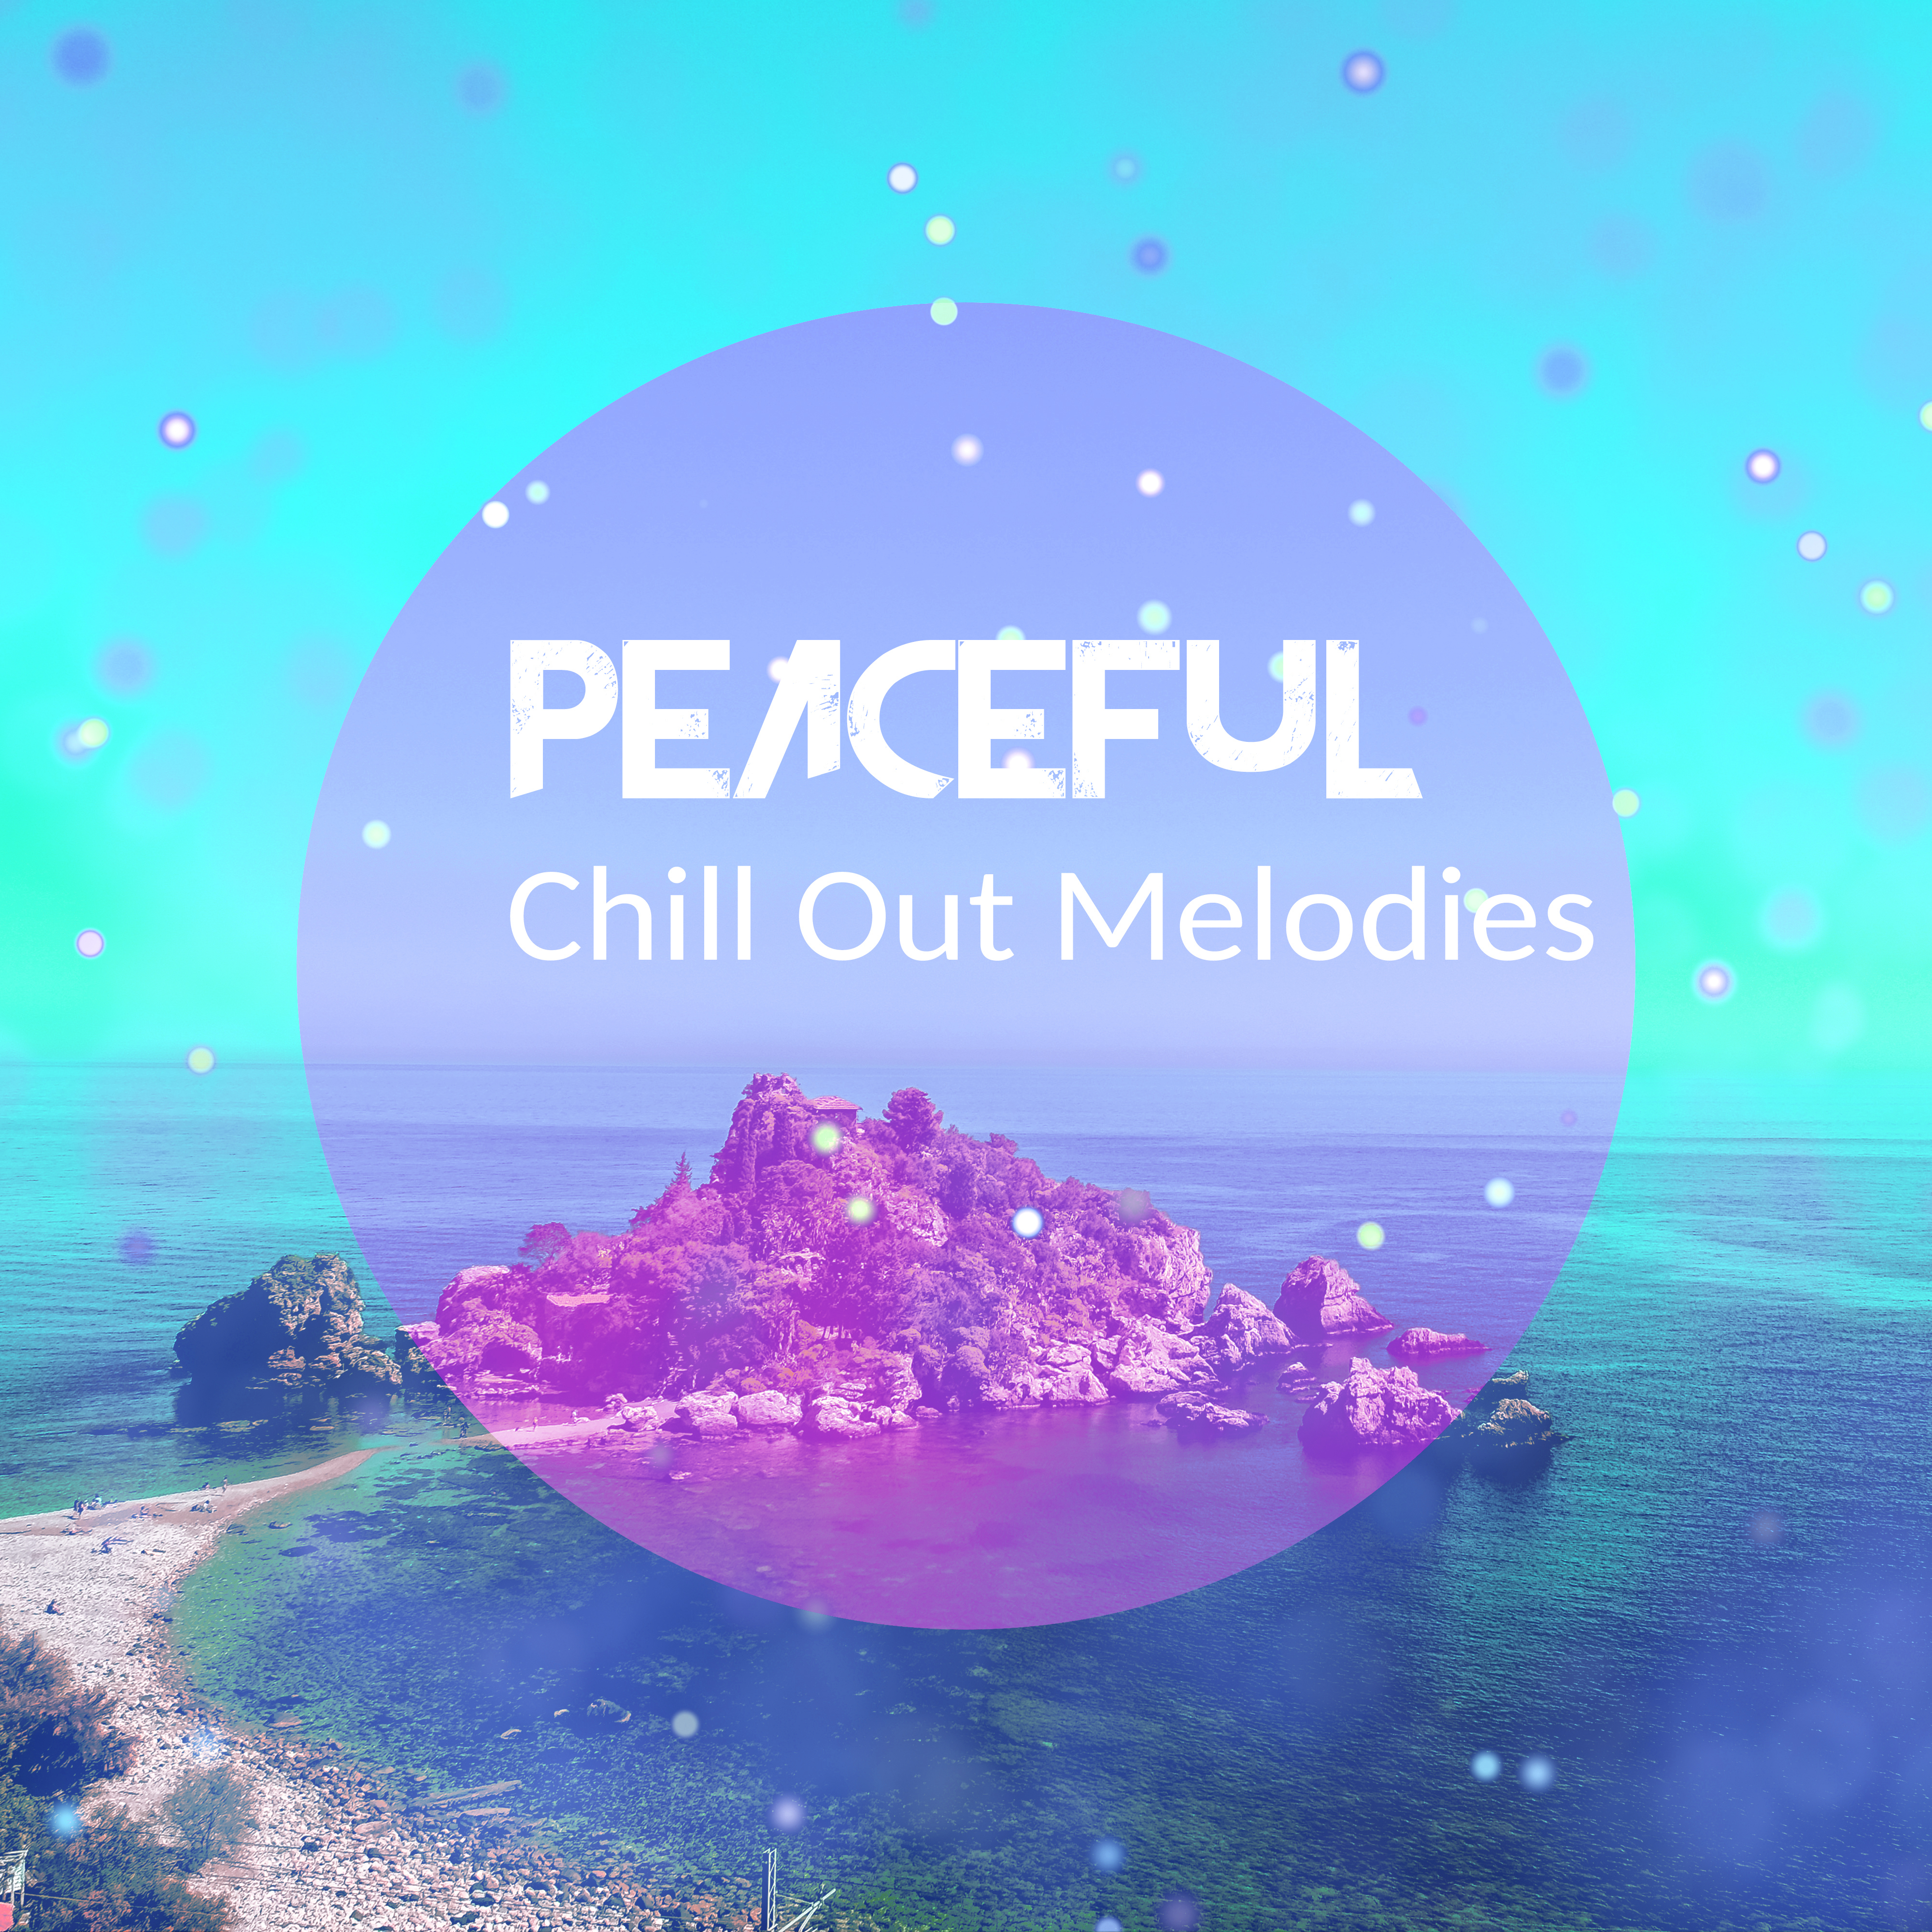 Peaceful Chill Out Melodies  Easy Listening Chill Out Songs, No More Stress, Mind Rest, Summertime Music